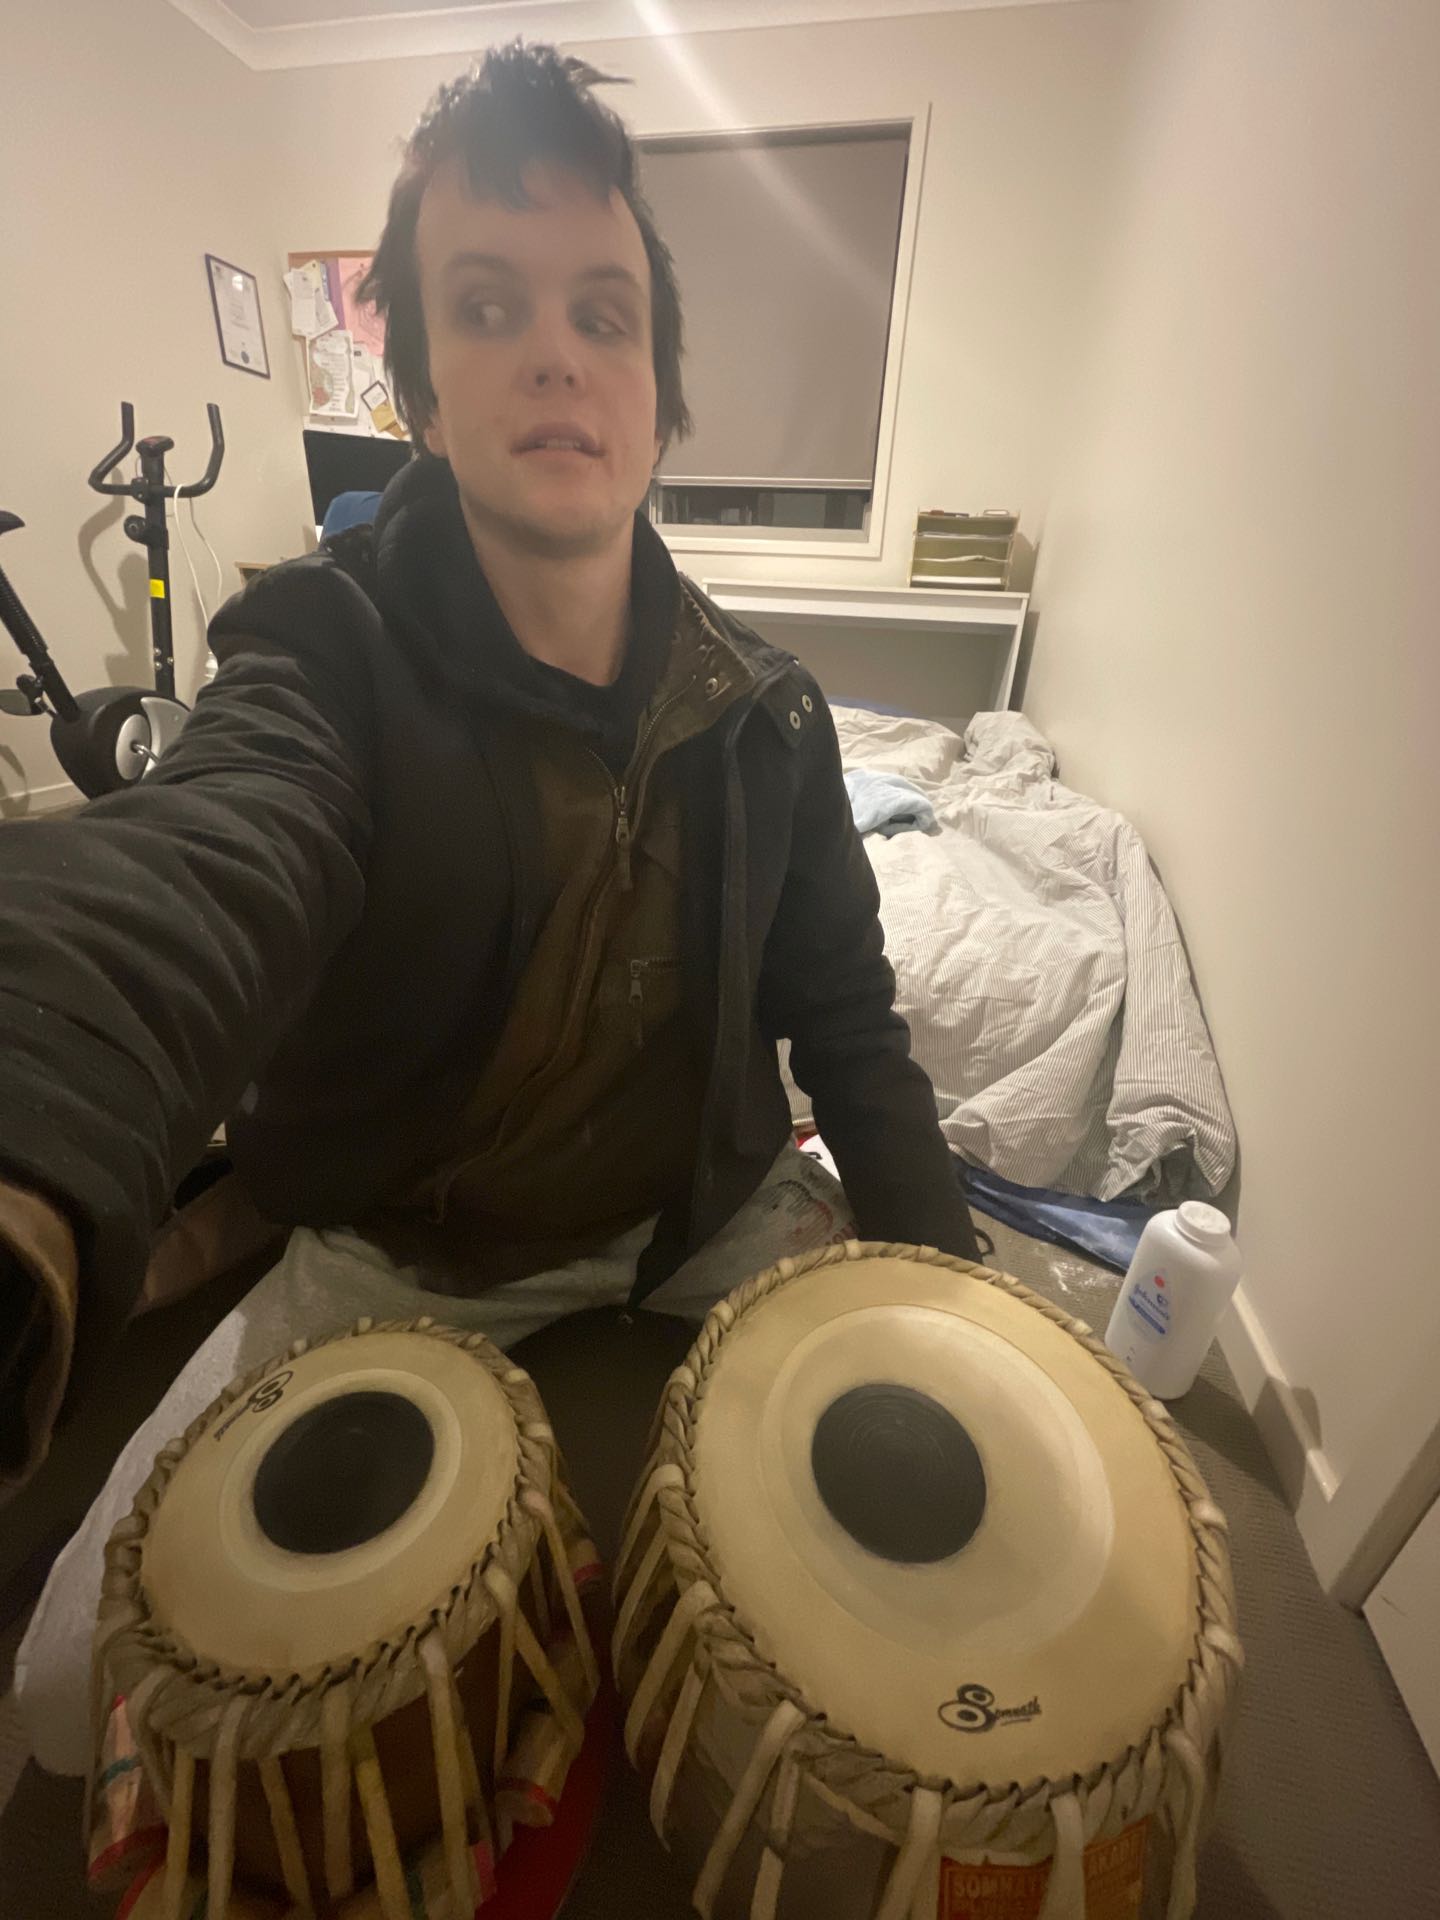 A picture of me with my first Tabla set